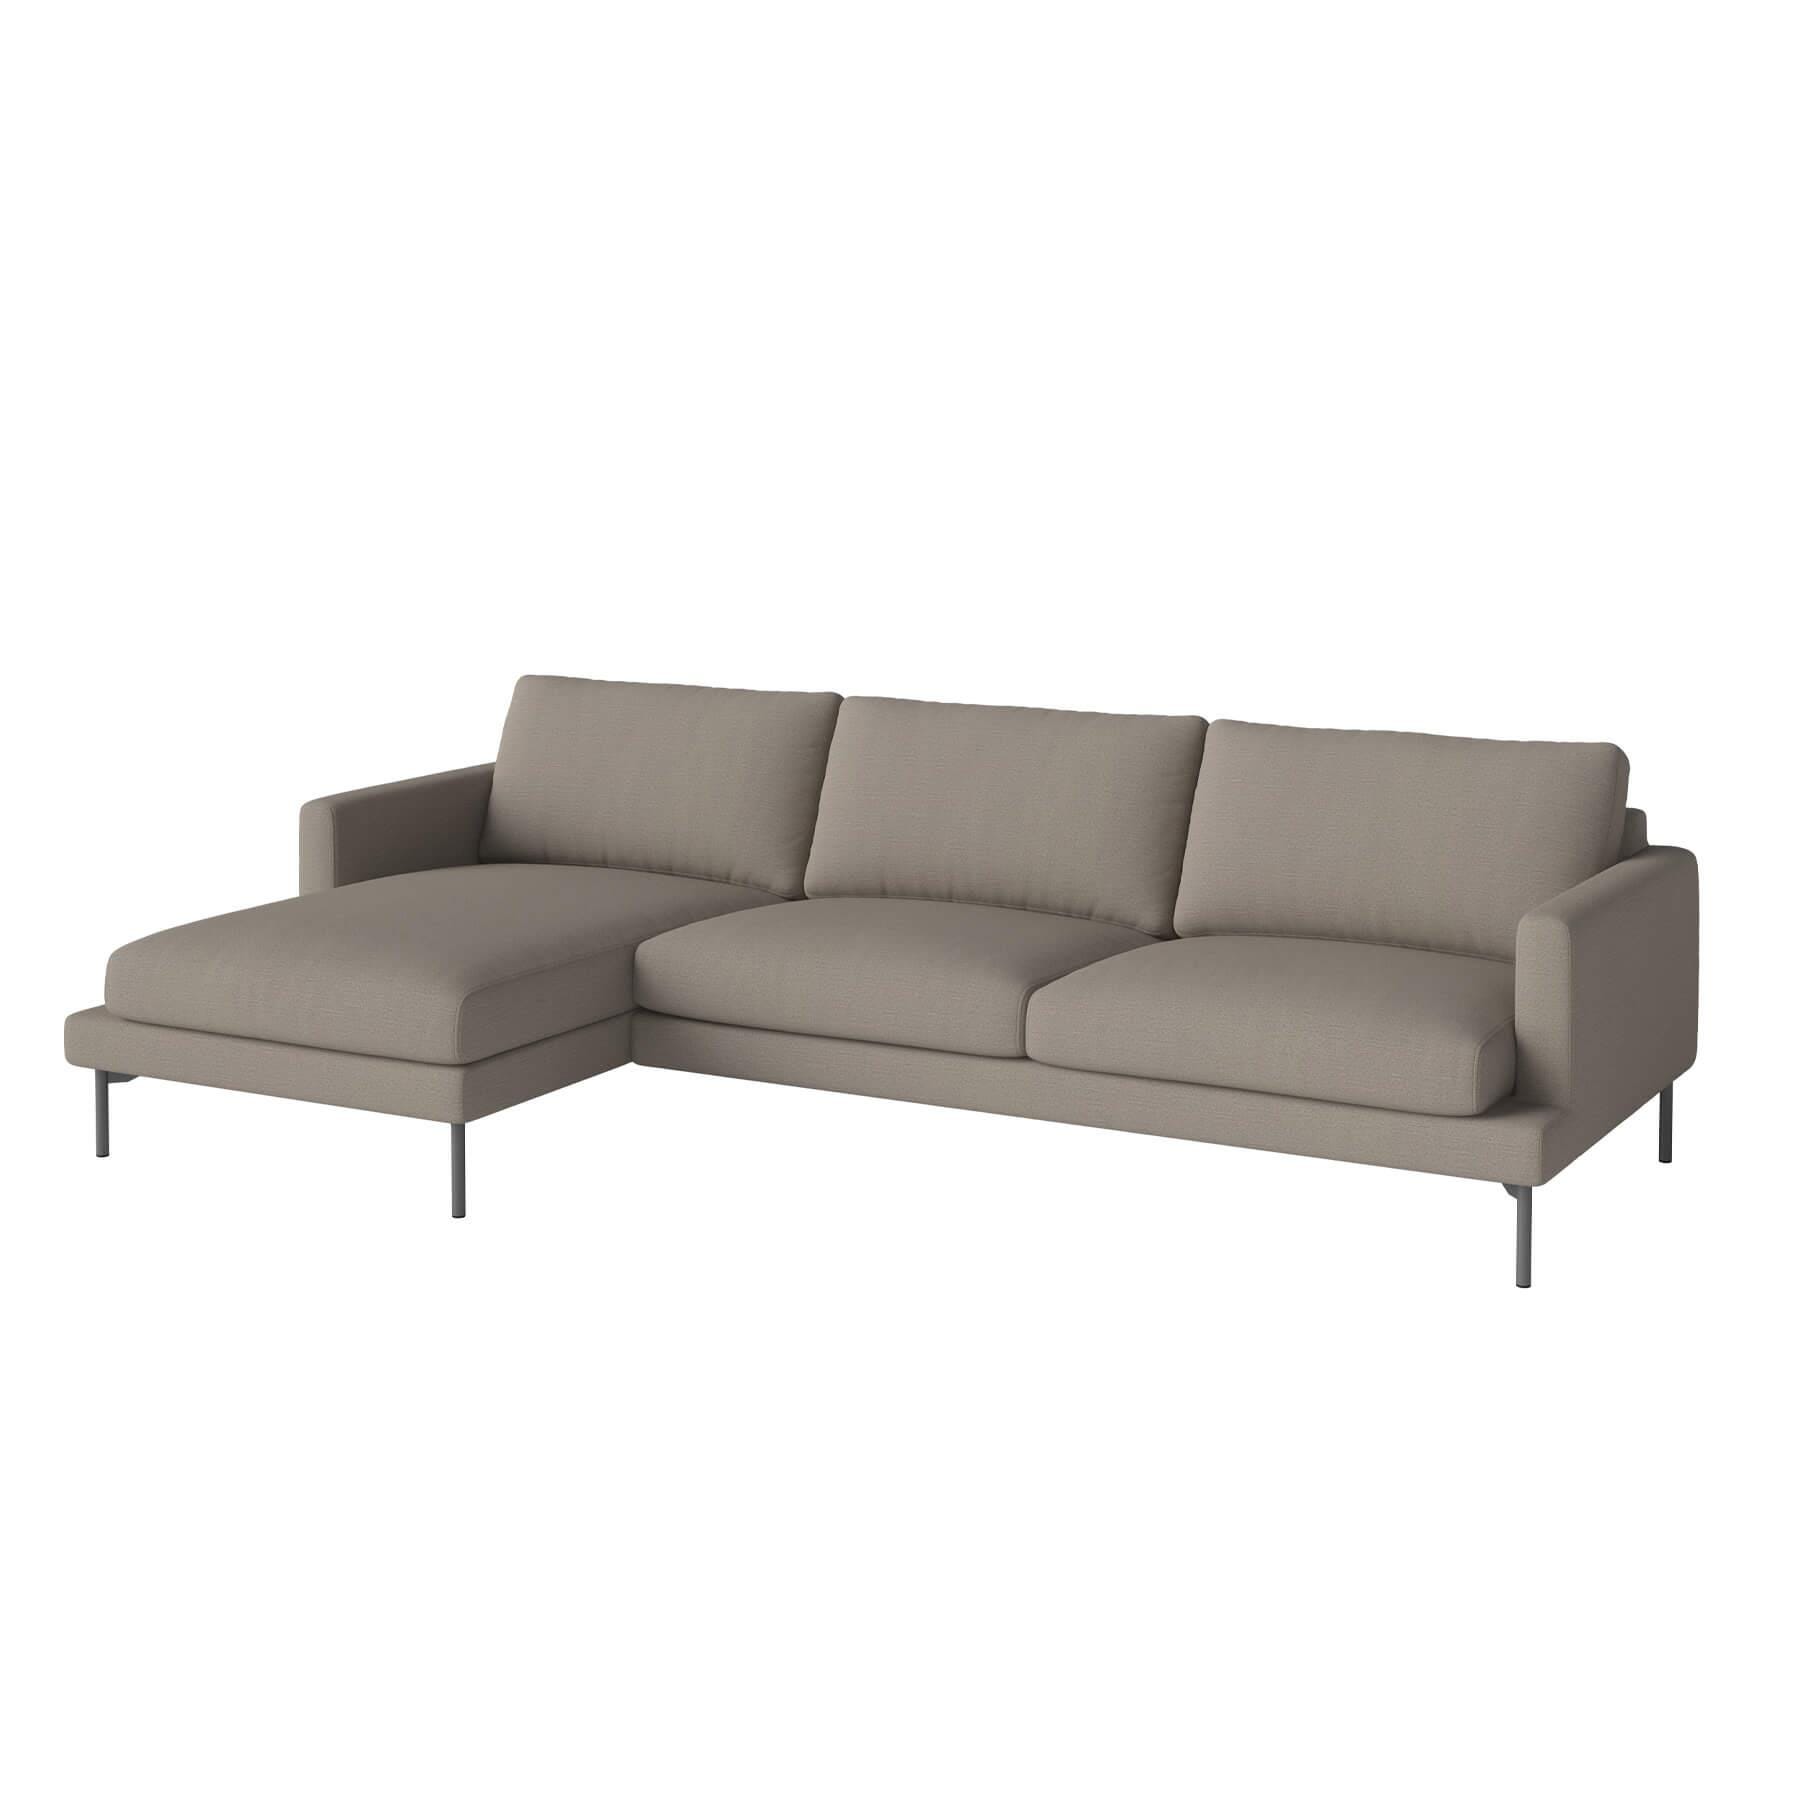 Bolia Veneda Sofa 35 Seater Sofa With Chaise Longue Grey Laquered Steel Baize Dark Beige Left Brown Designer Furniture From Holloways Of Ludlow